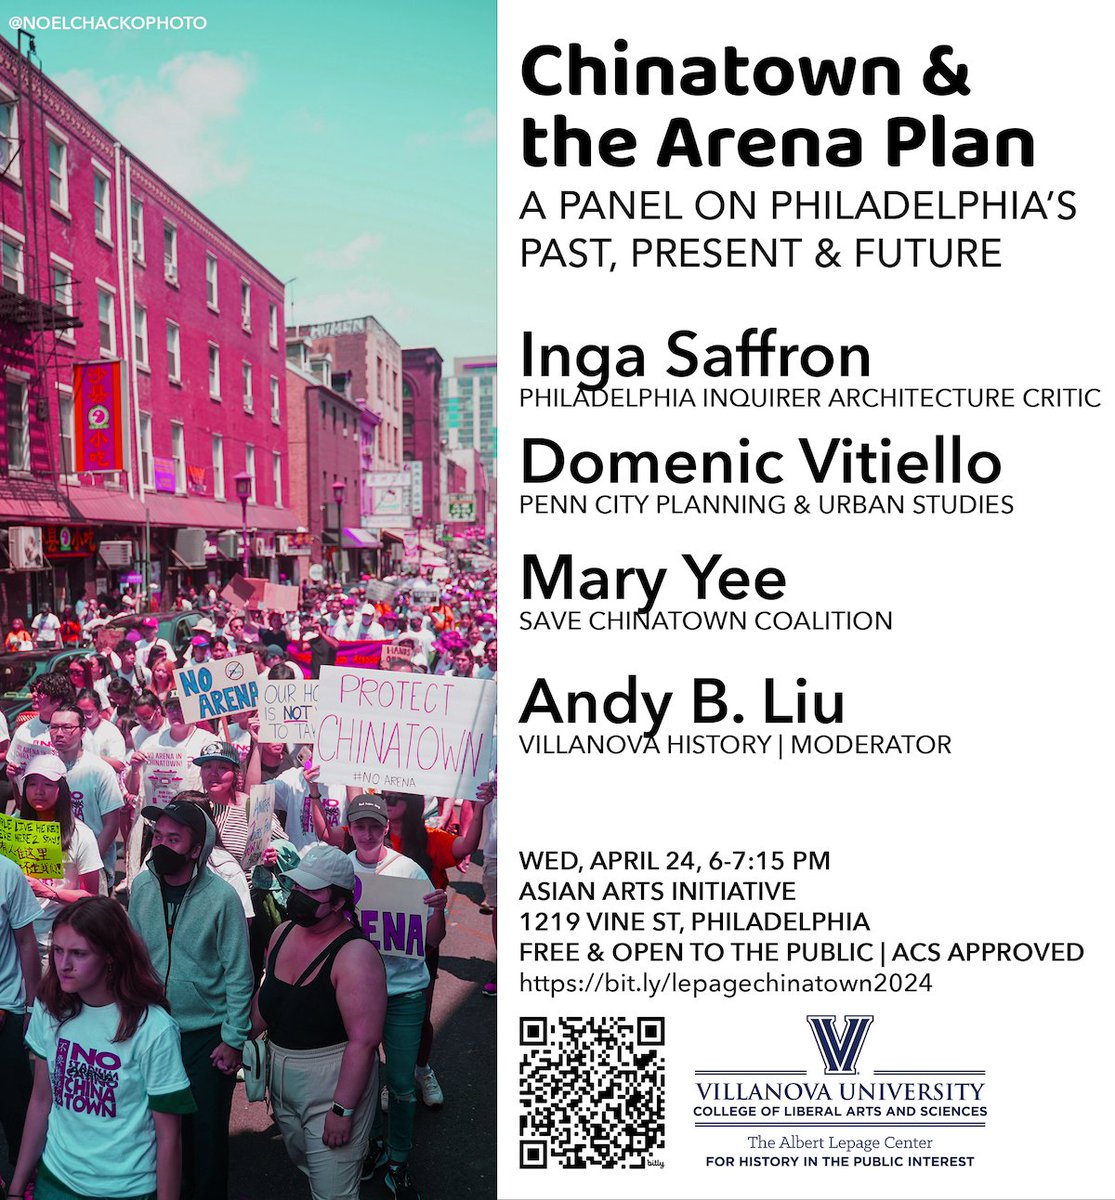 hello philly! 4.24 (wed), there'll be a history panel on Chinatown and the controversial 76ers arena plan. with VU's @lepagevu center and hosted @AsianArtsPhilly! featuring activist Mary Yee; historian Domenic Vitiello; and prize-winning critic @IngaSaffron - spread the word!